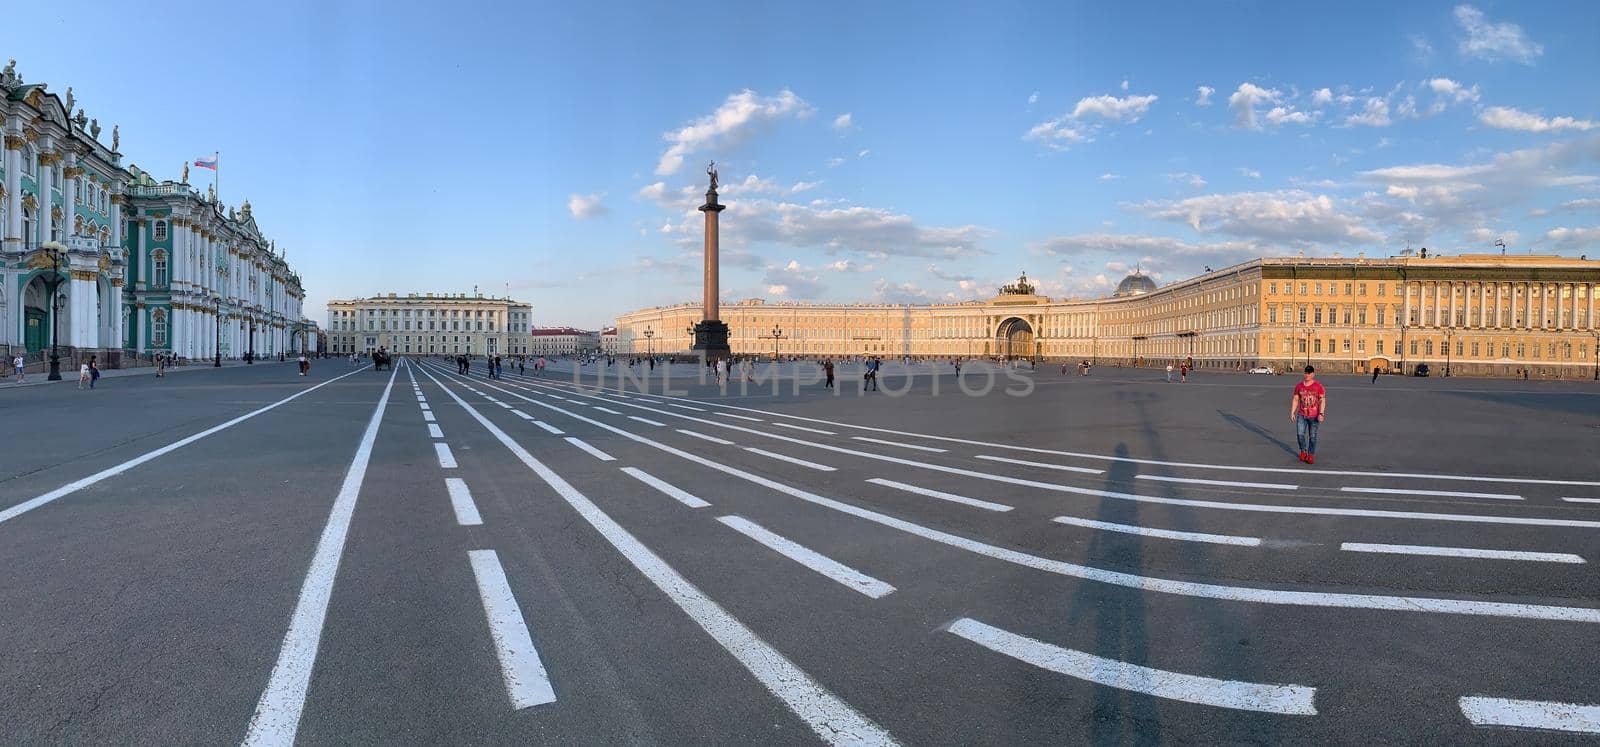 Russia, St.Petersburg, 09 June 2020: Specular panoramic image of the Palace square at sunset, residents walk across square, the Alexandria column on a background. High quality photo